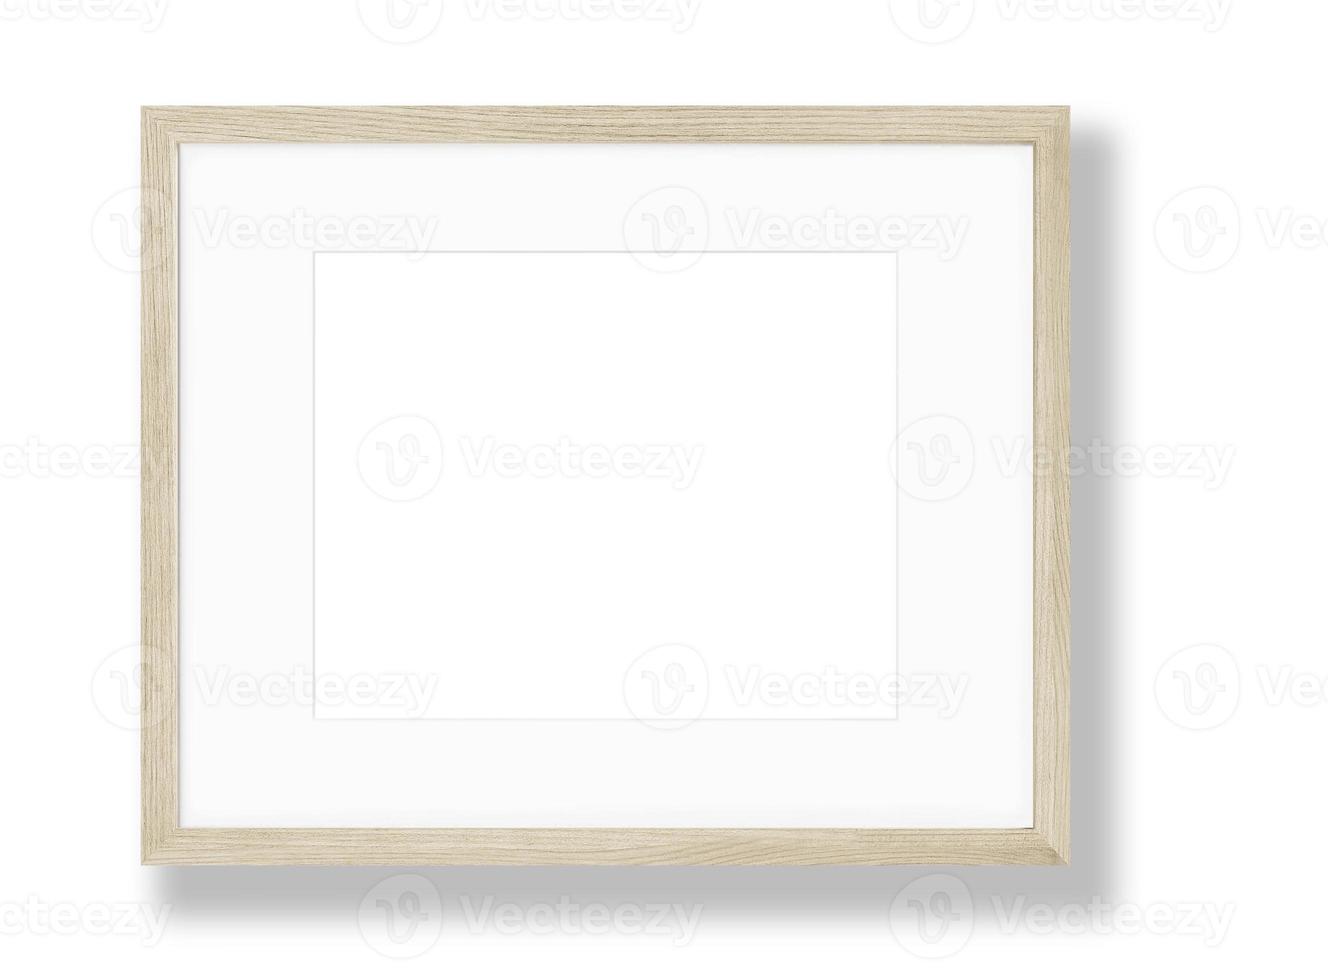 Framed Art Stock Photos, Images and Backgrounds for Free Download